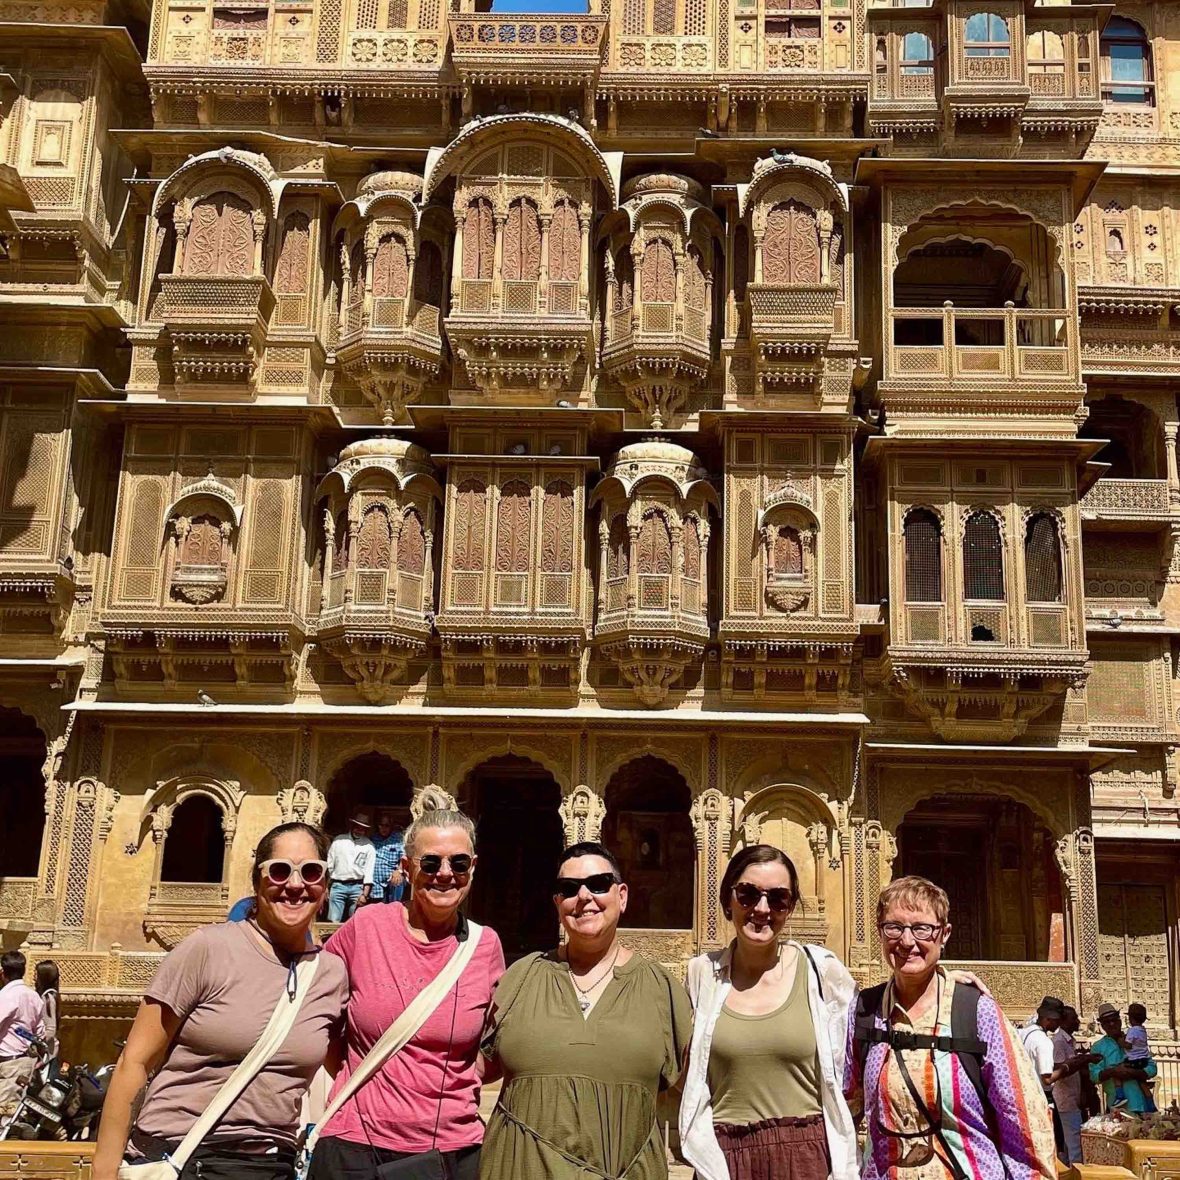 A group of women smile in front of an ornate building.